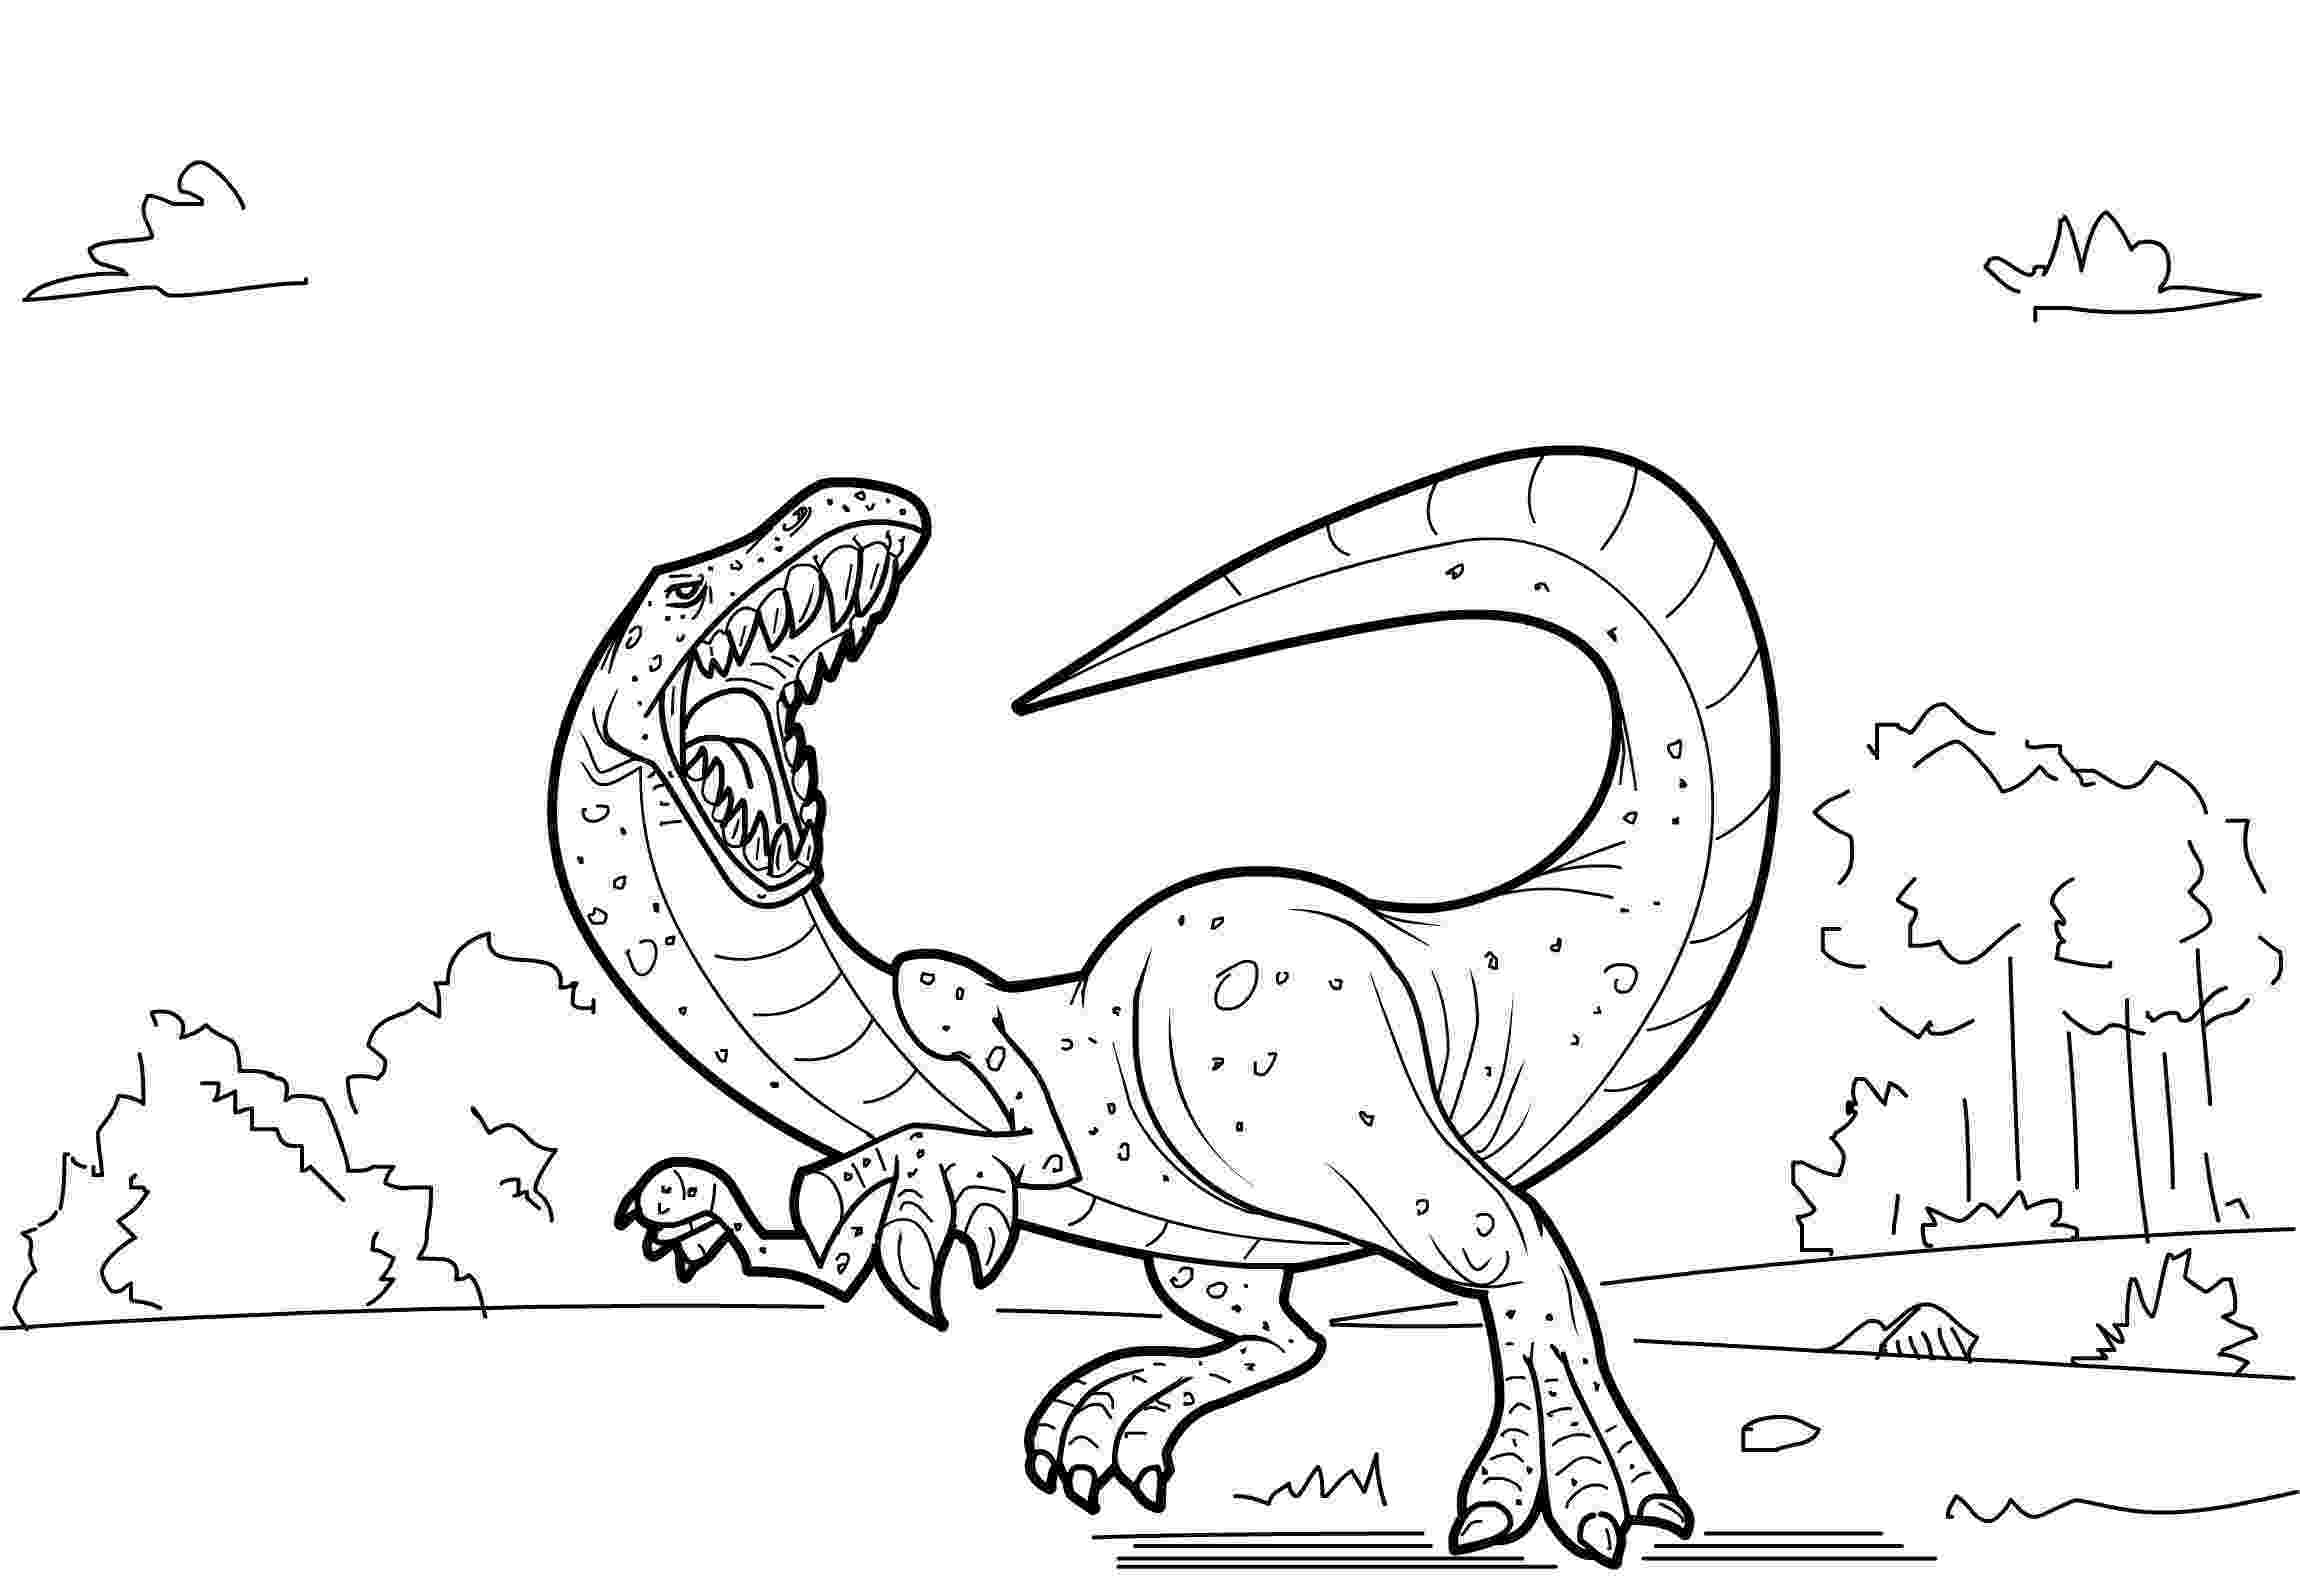 dinosaur colouring pages free printables t rex dinosaur coloring pages for kids printable free pages printables dinosaur free colouring 